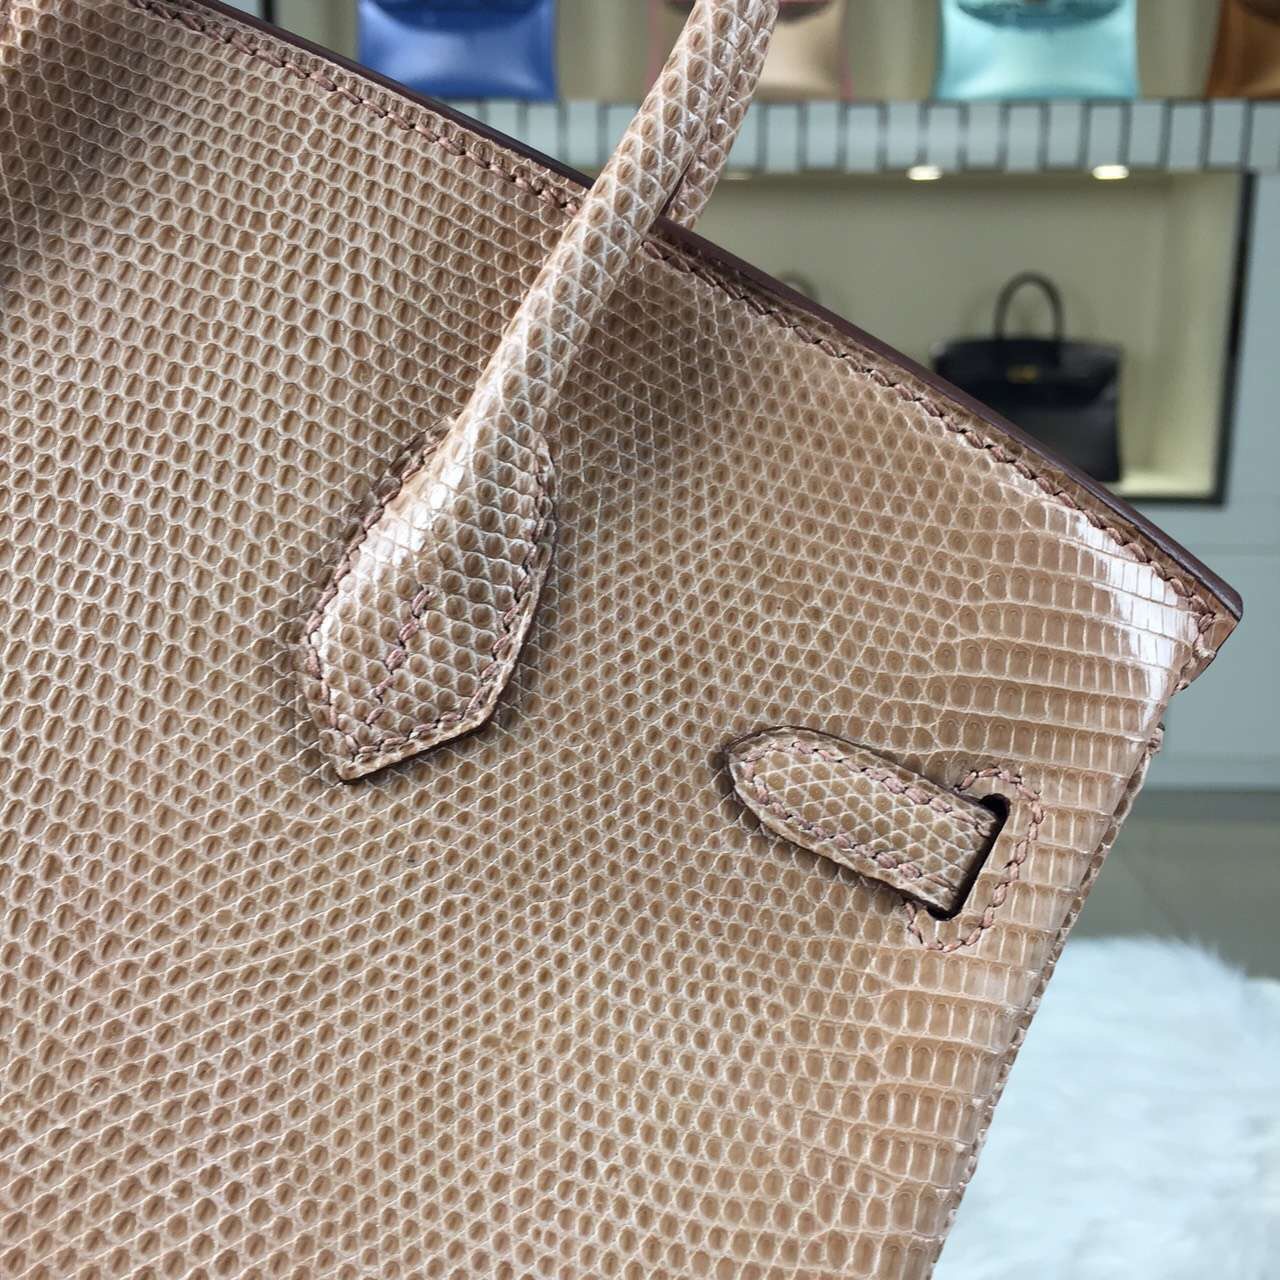 Hermes Customised France Imported Lizard Leather Birkin Bag30cm in Apricot